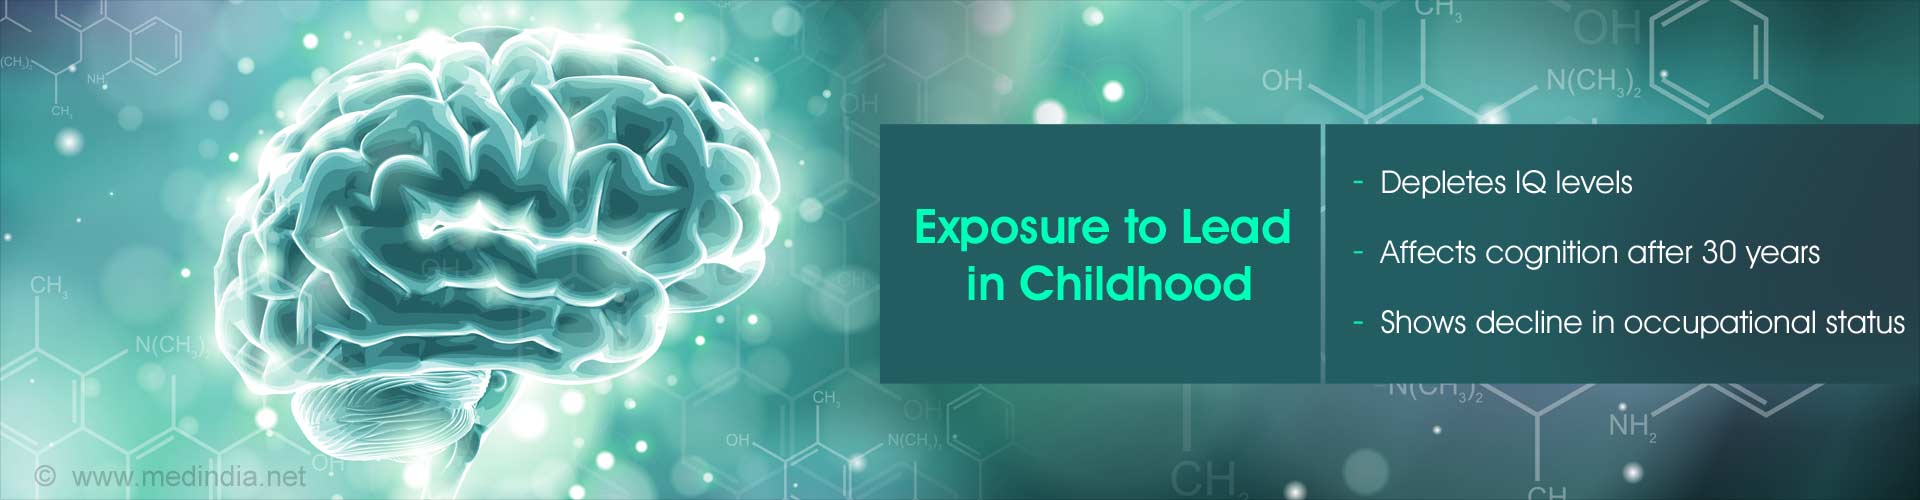 Exposure to lead in childhood
- depletes IQ levels
- affects cognition after 30 years
- shows decline in occupational status